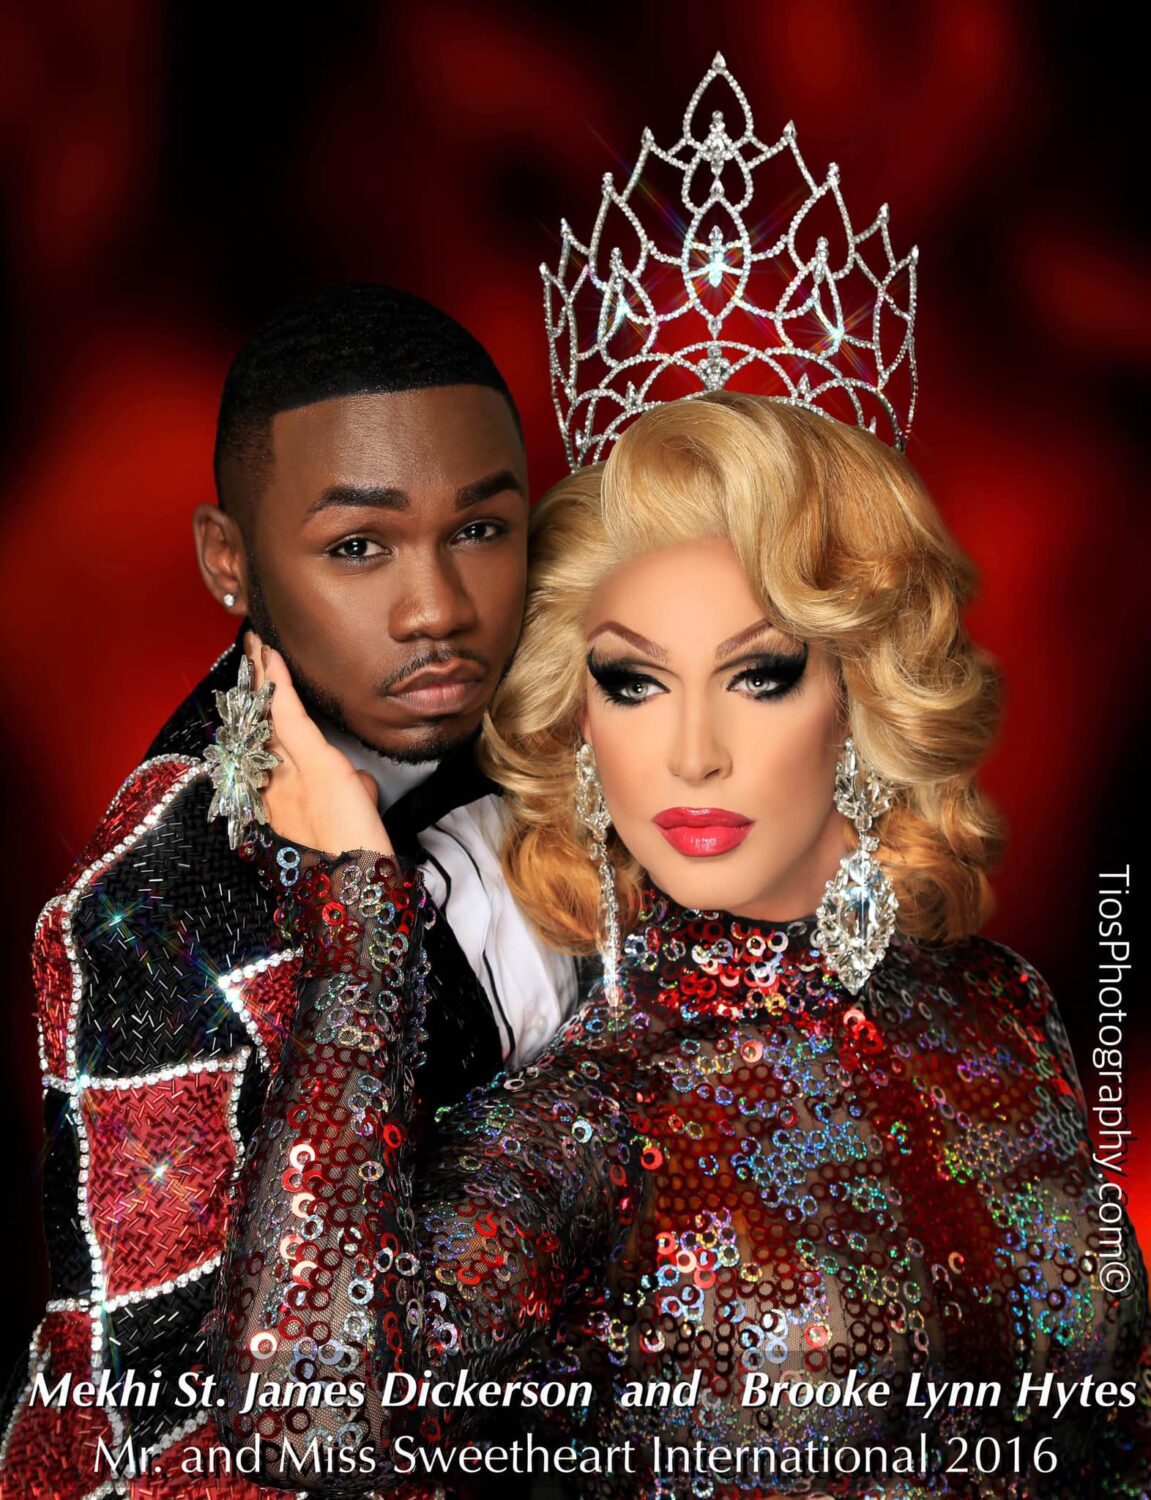 Mekhi St. James Dickerson and Brooke Lynn Hytes | Promotional Photo for Mr. and Miss Sweetheart International 2016